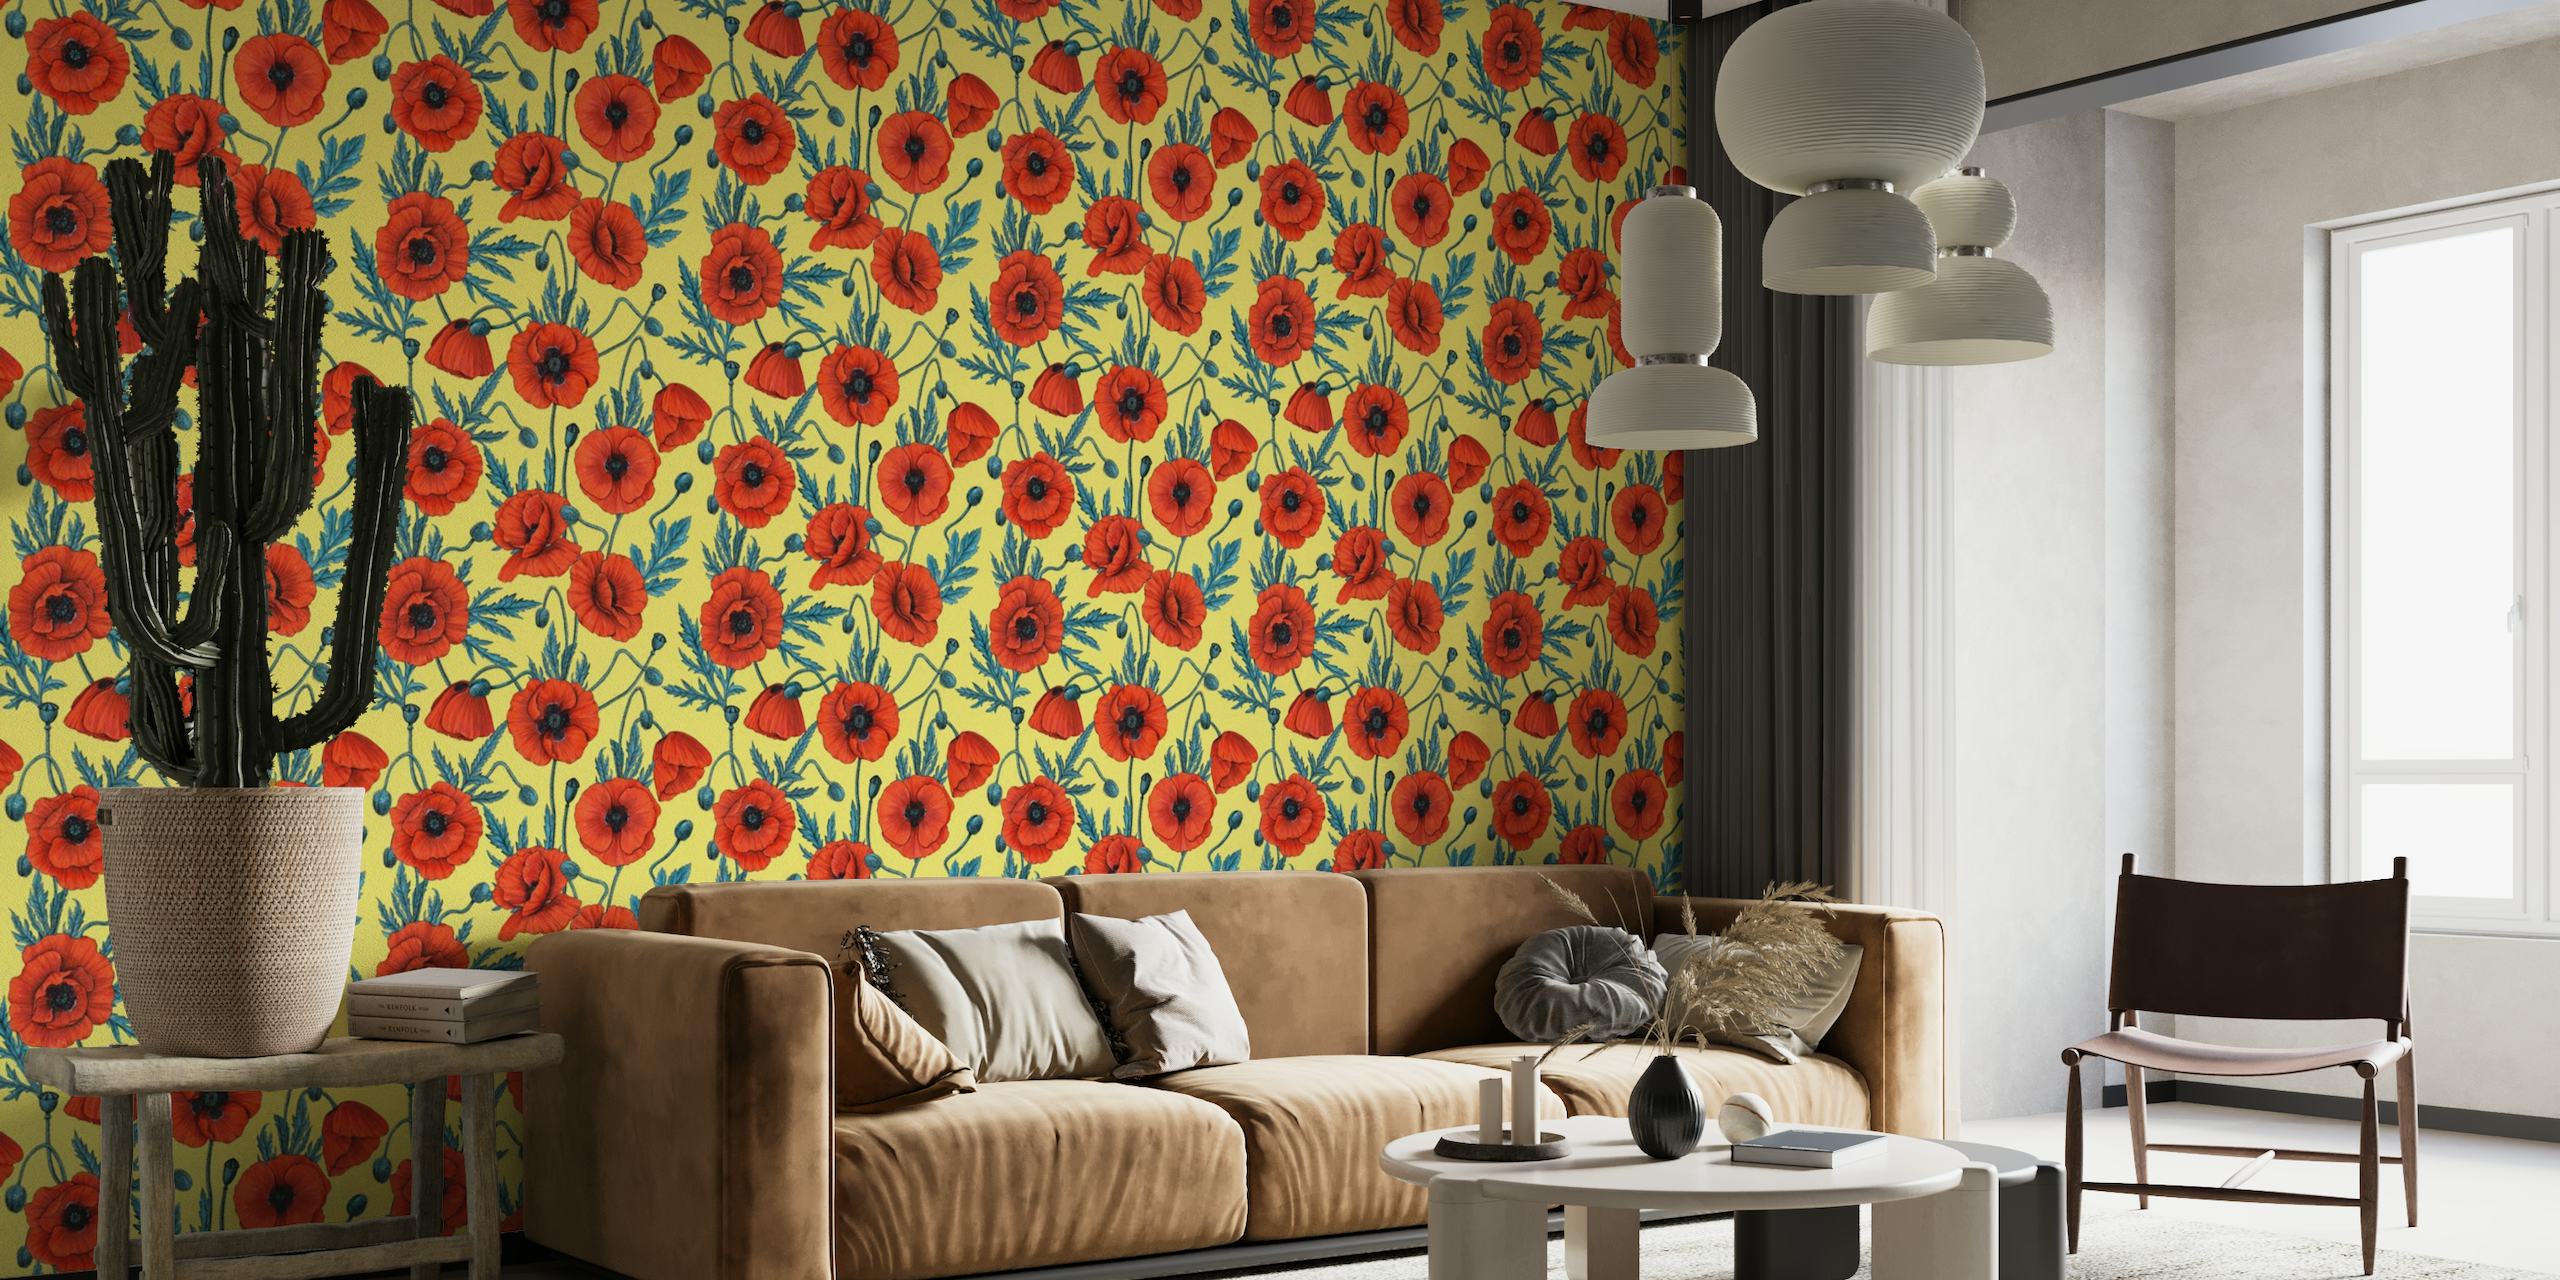 A wall mural with a sunny yellow background and a pattern of red poppies and blue leaves